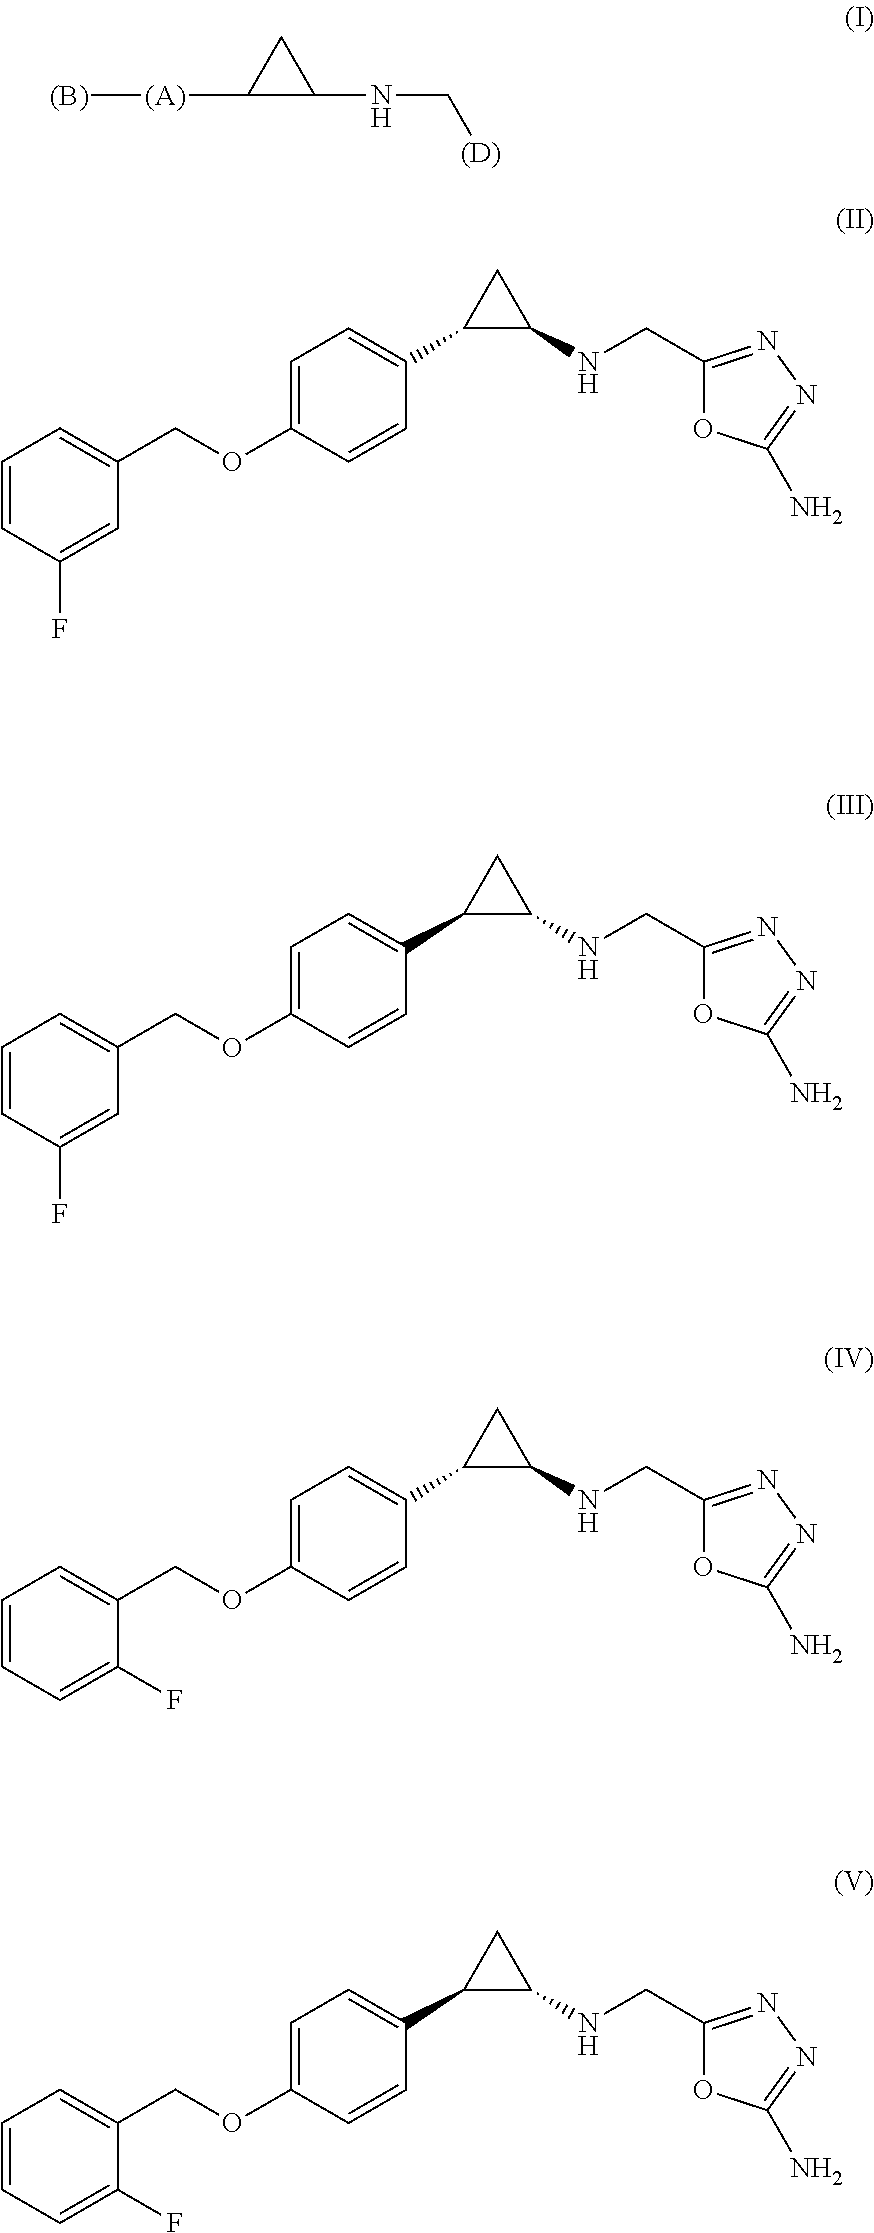 Arylcyclopropylamine based demethylase inhibitors of lsd1 and their medical use